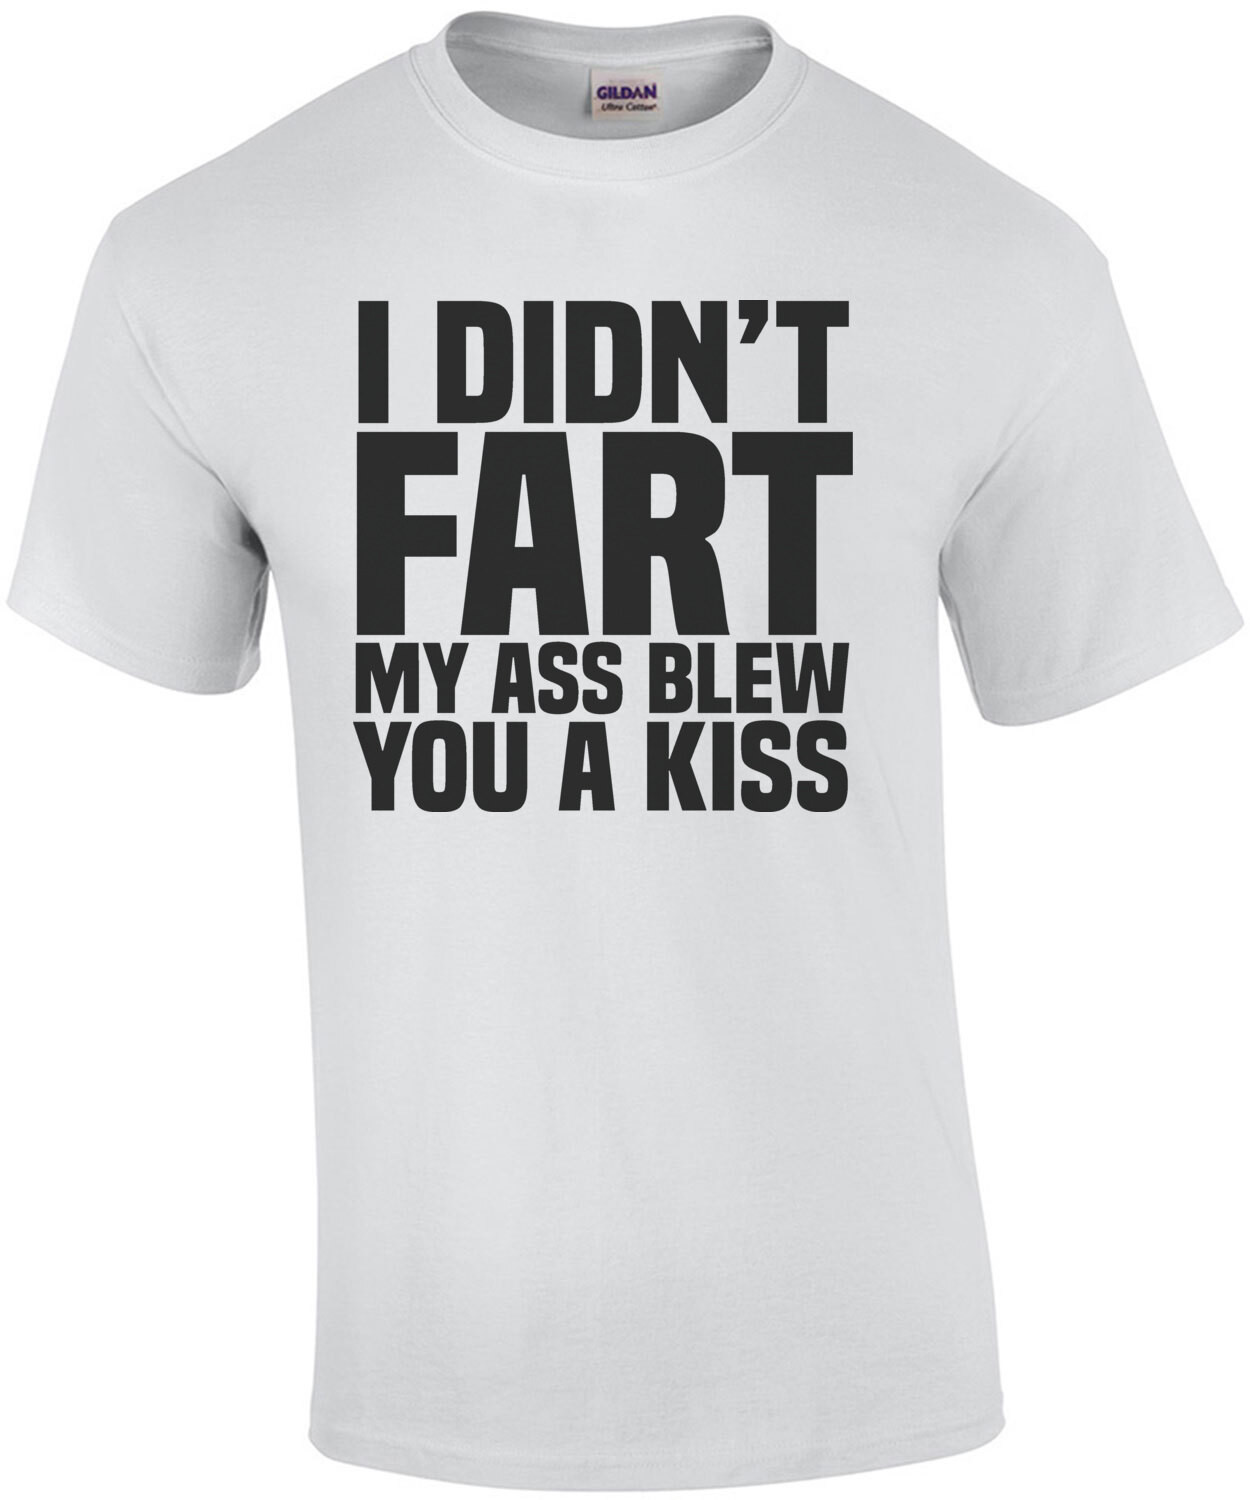 I didn't fart - my ass blew you a kiss - funny t-shirt